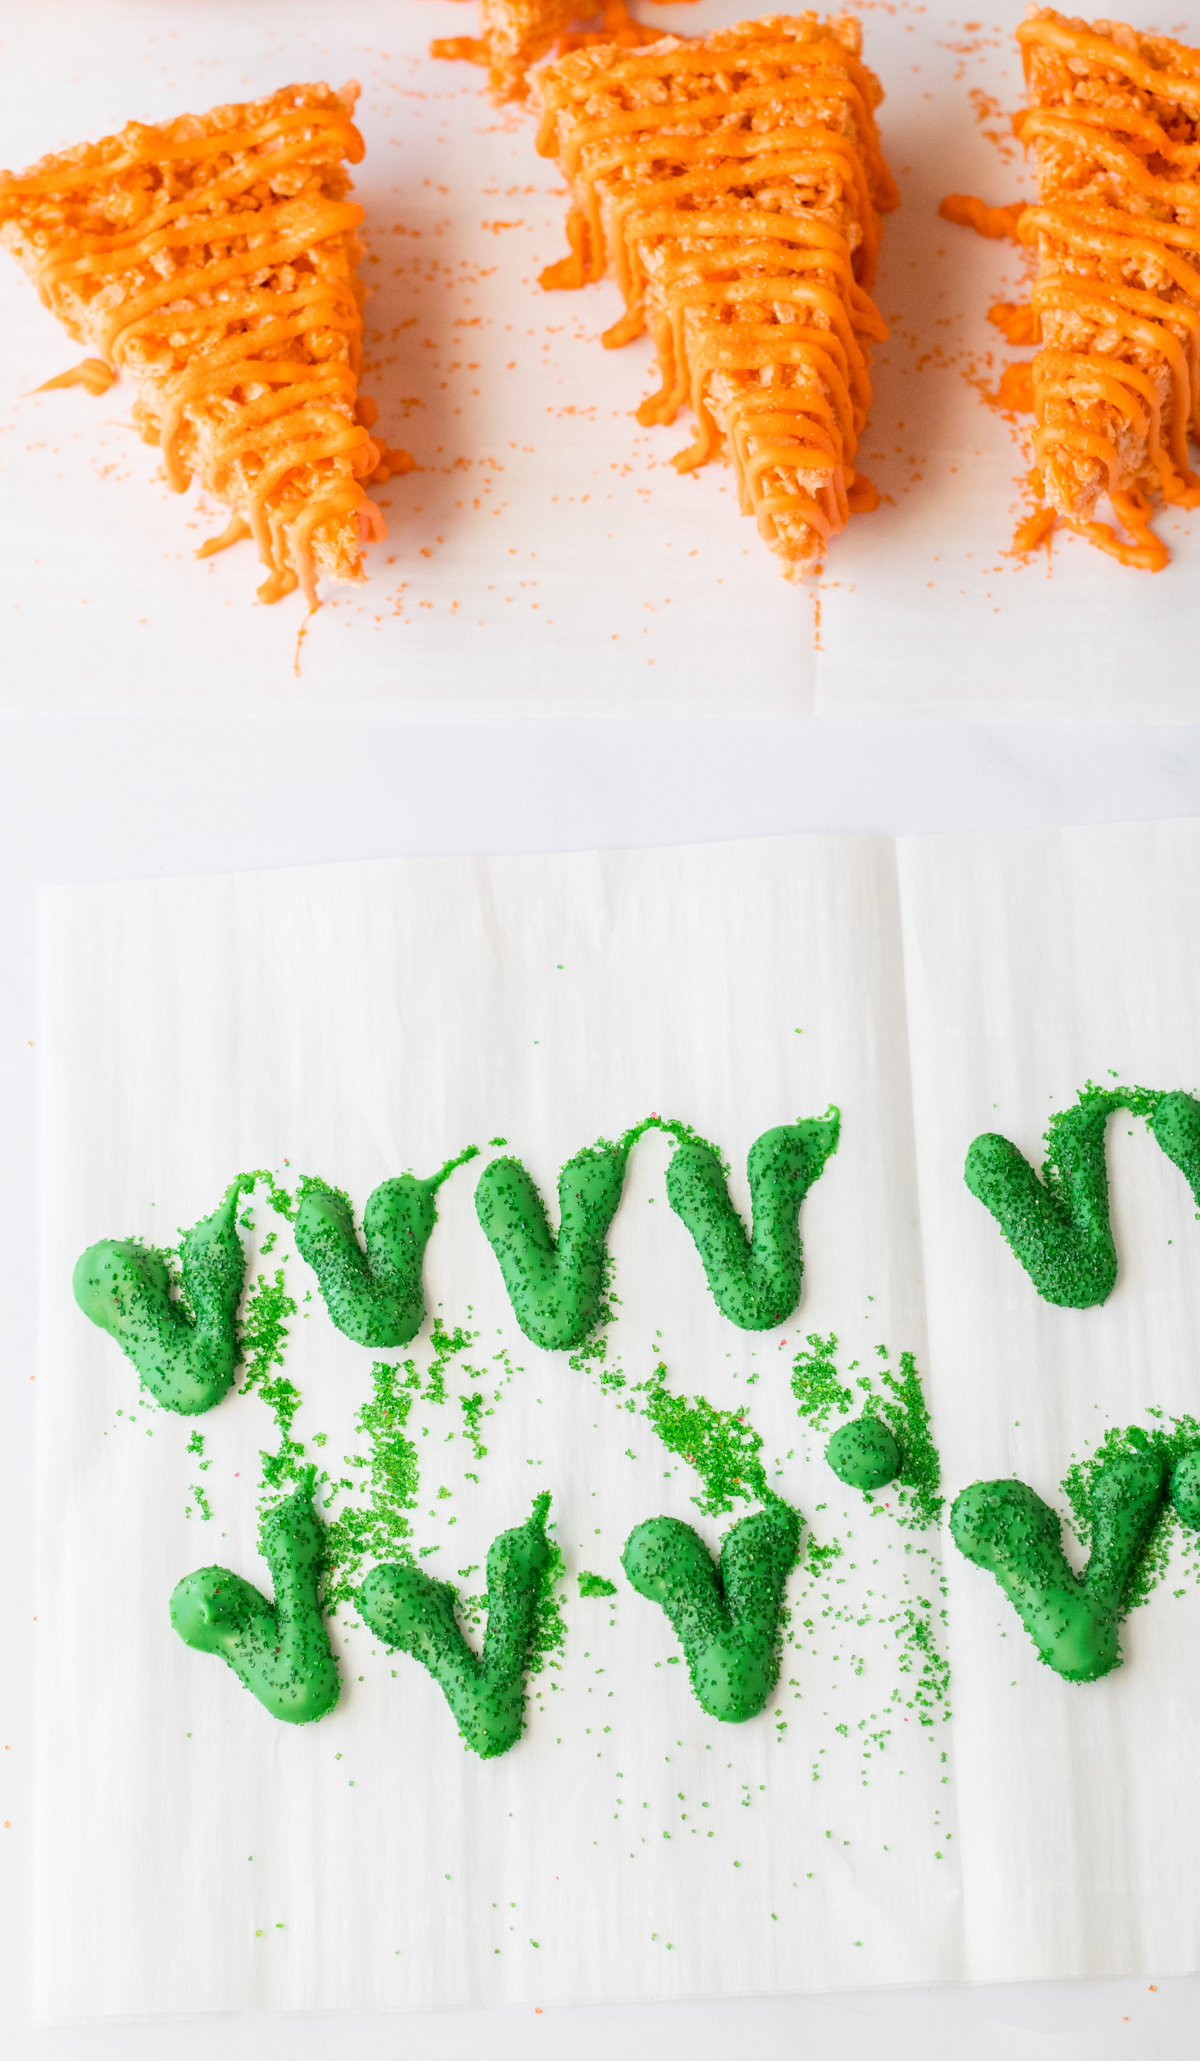 green carrot stems made out of candy melts